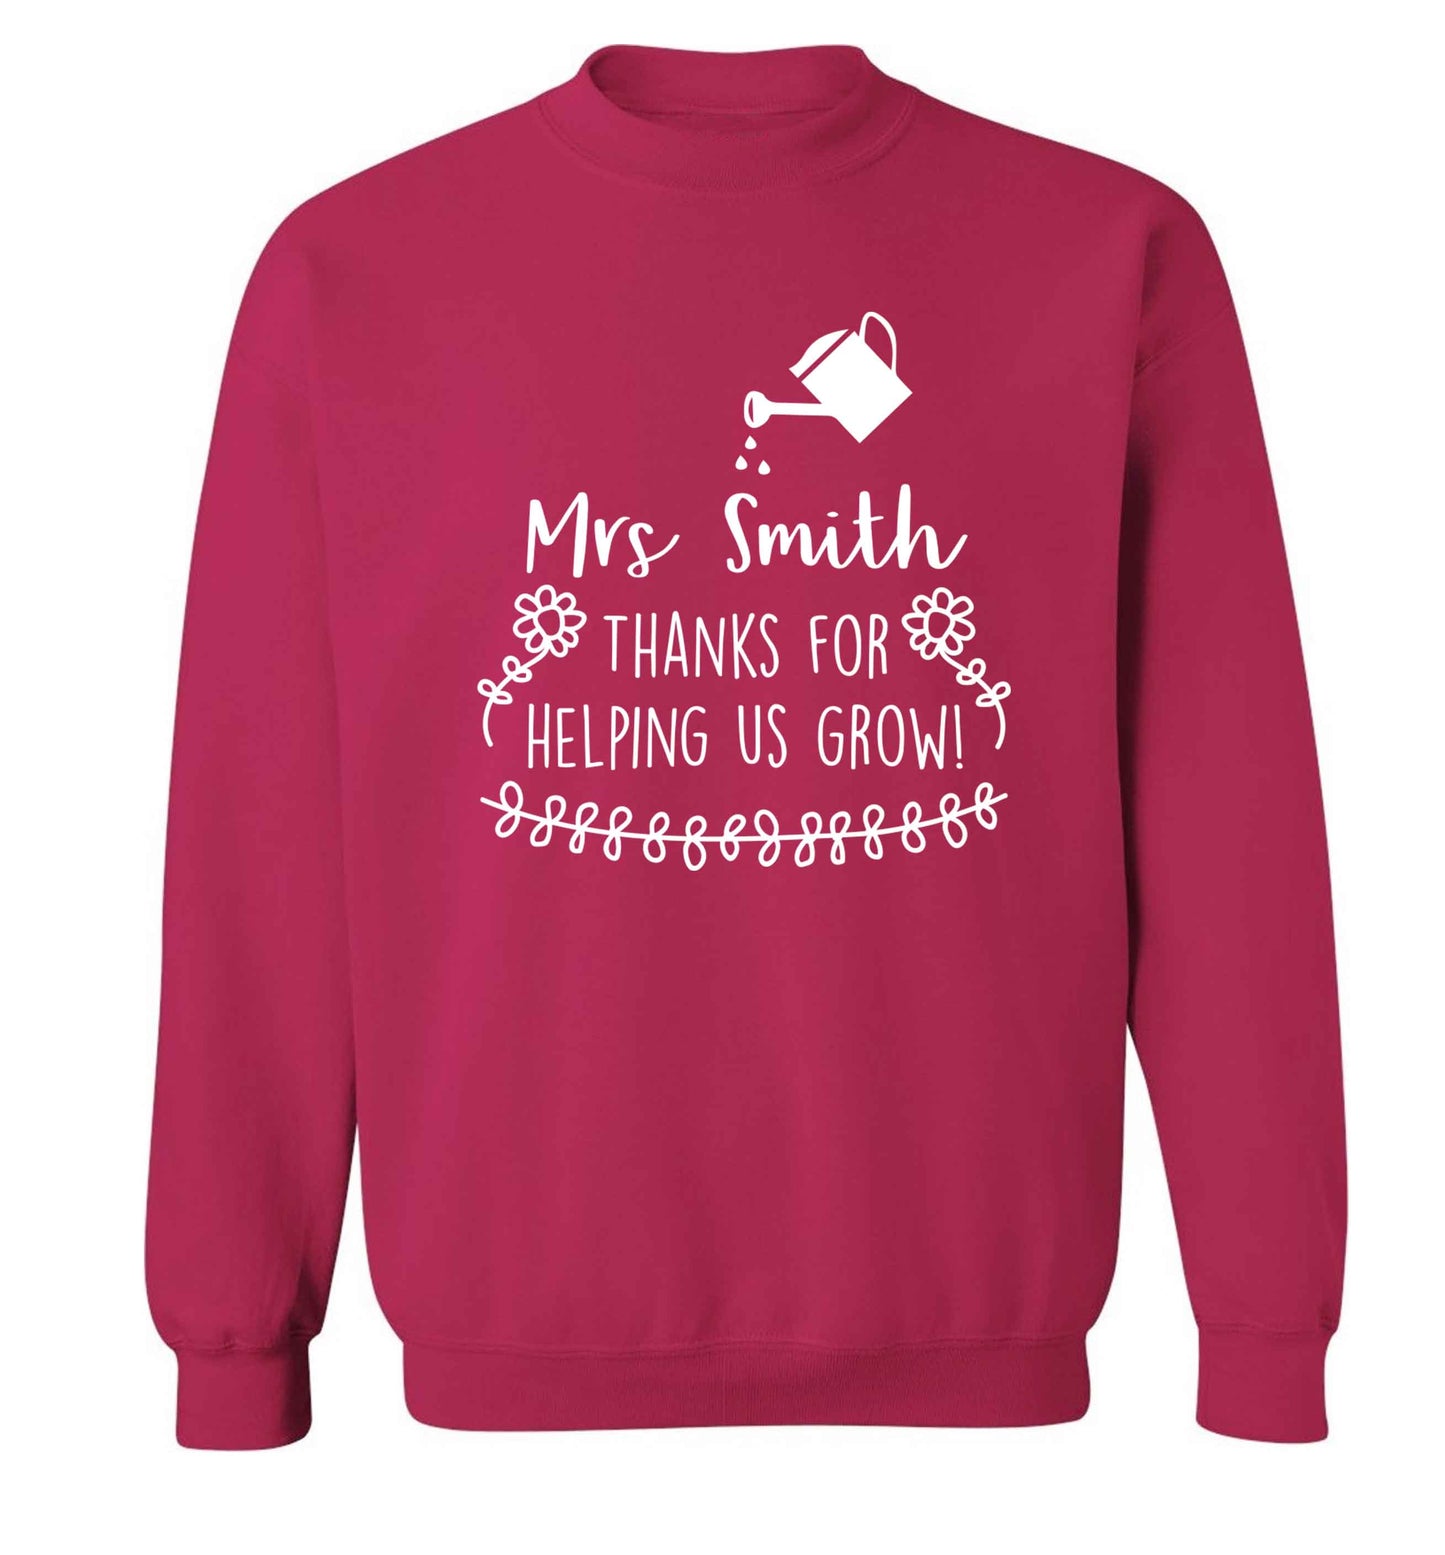 Personalised Mrs Smith thanks for helping us grow Adult's unisex pink Sweater 2XL